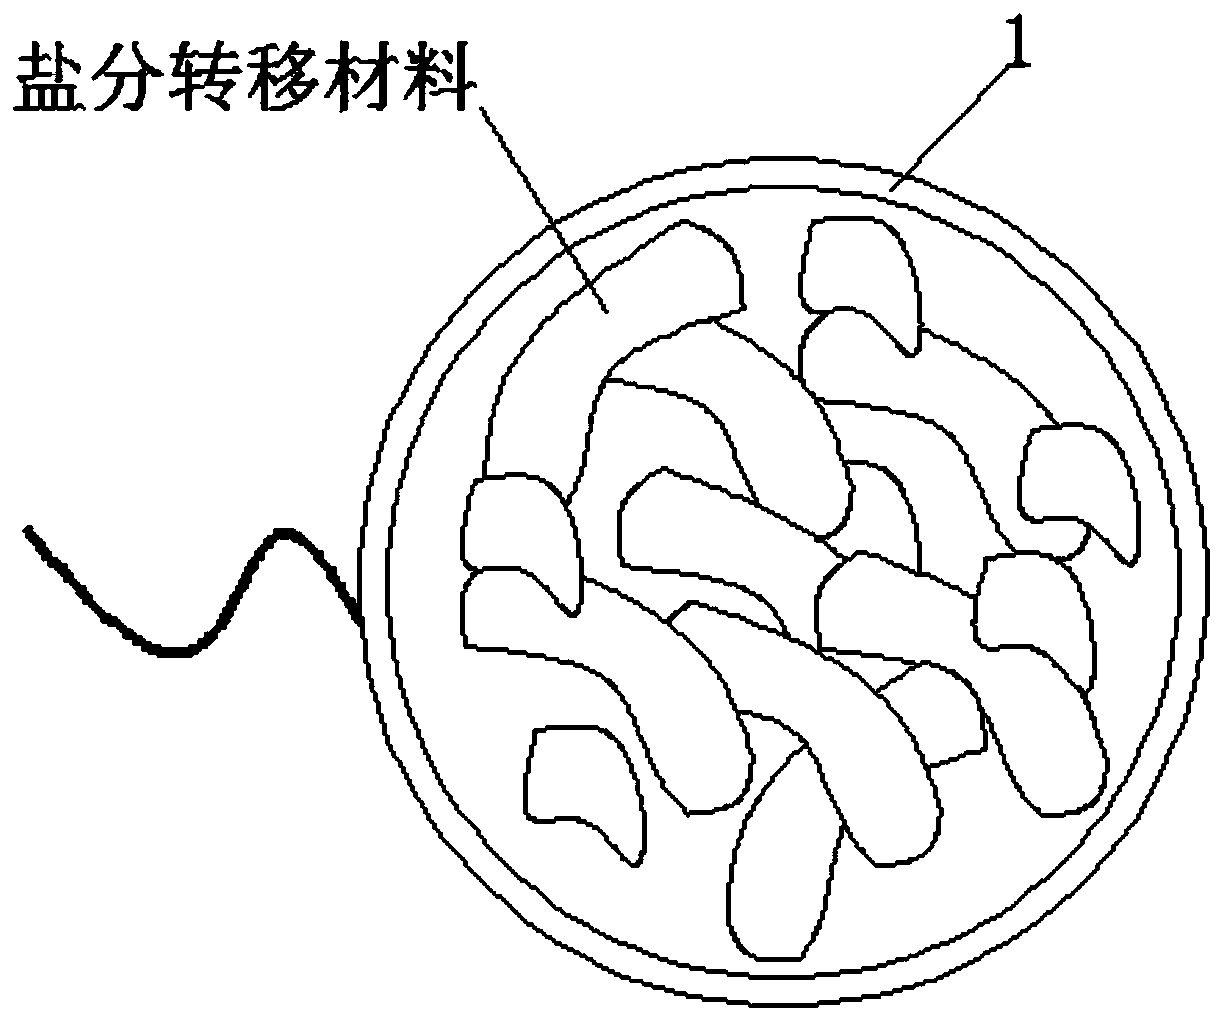 Bagged low-salt bean paste and production and processing method thereof